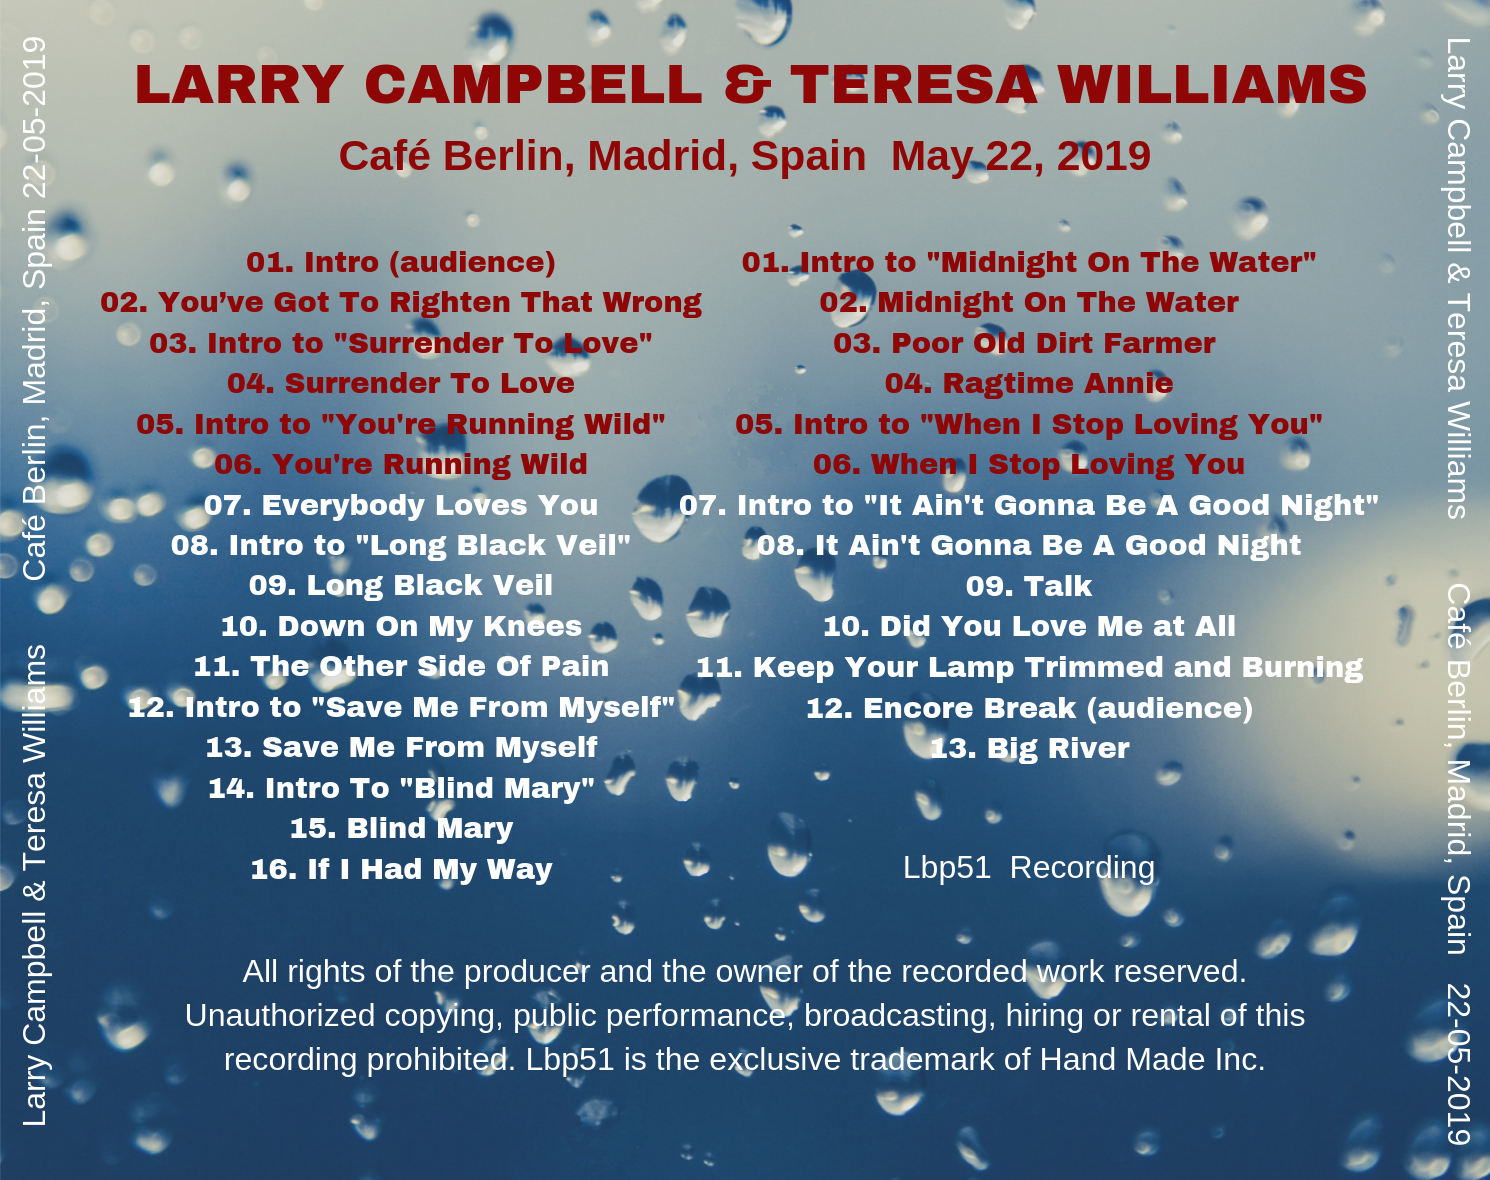 LarryCampbellTeresaWilliams2019-05-22CafeBerlinMadridSpain (3).png